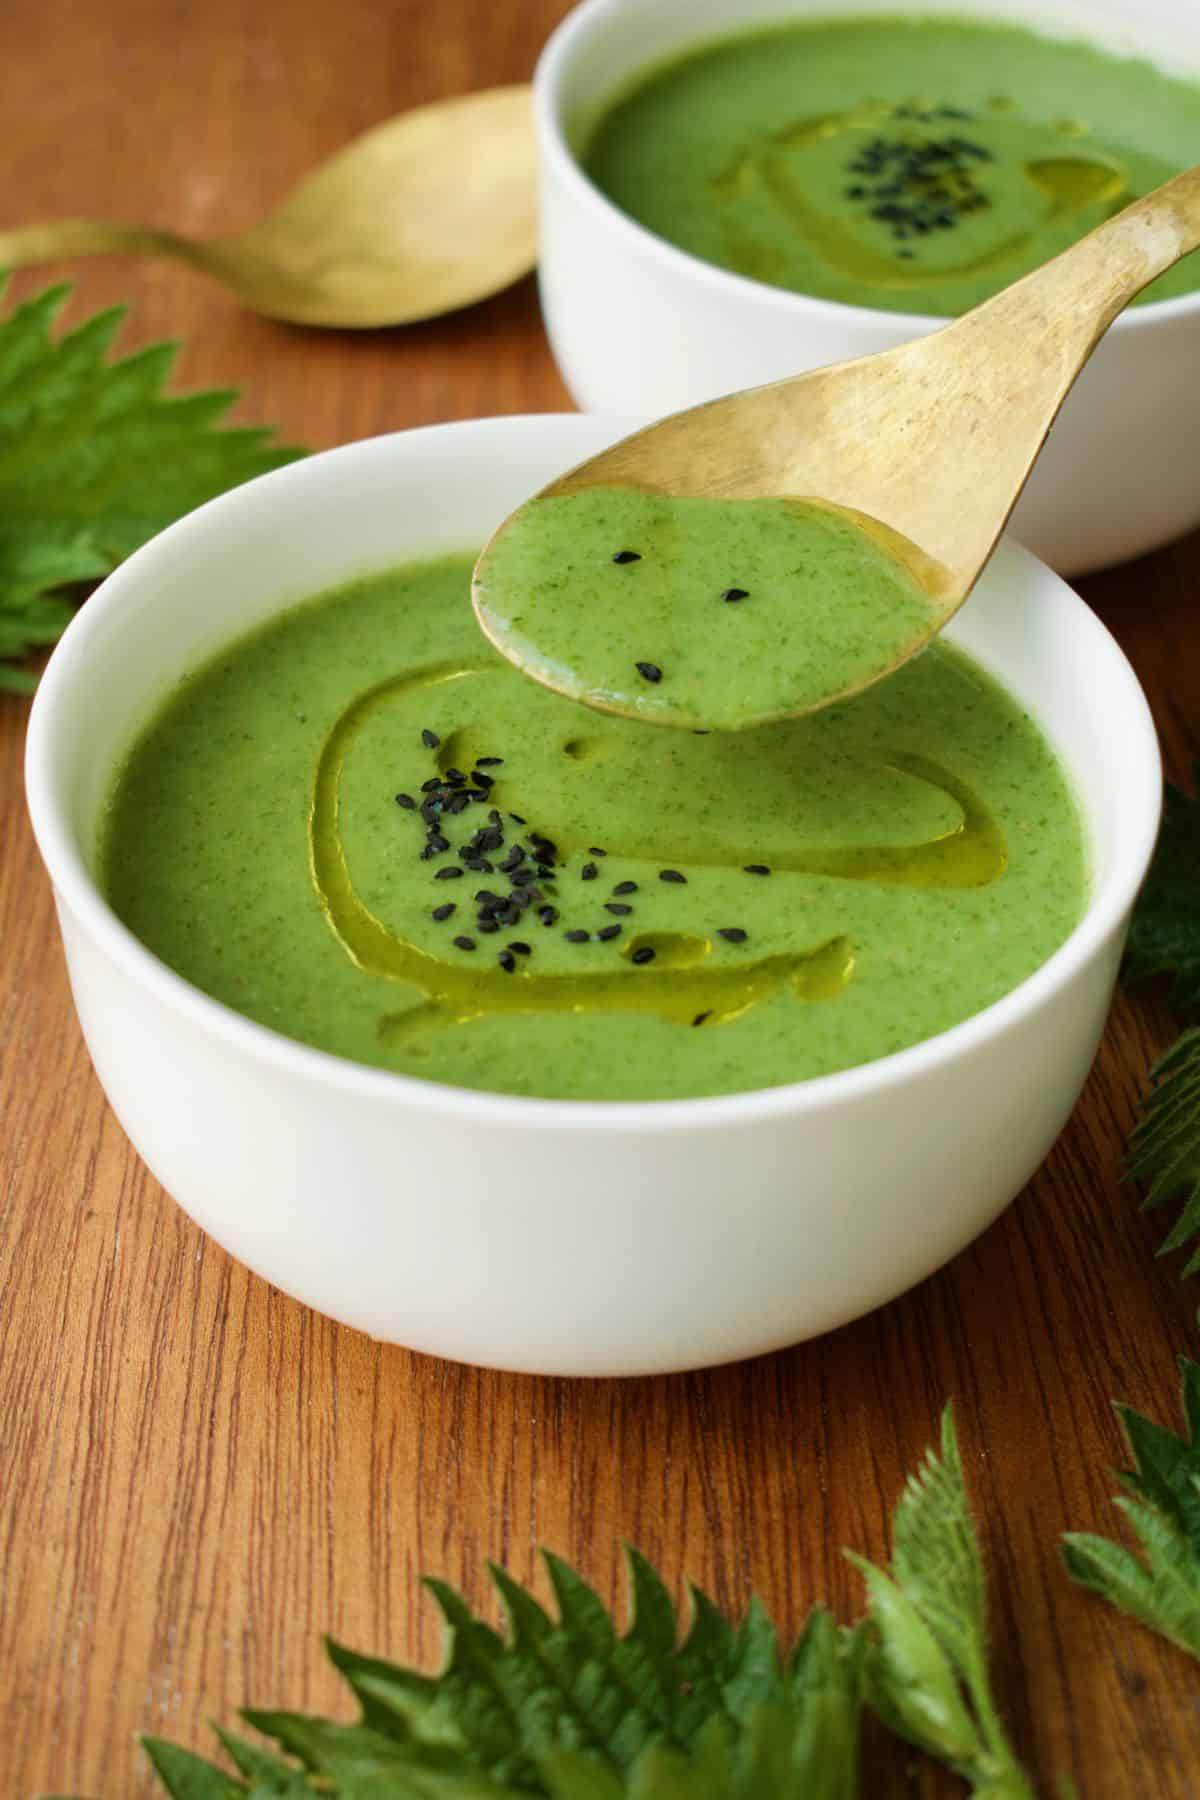 A golden spoon scoops a spoonful of the vibrant and fresh looking nettle soup.